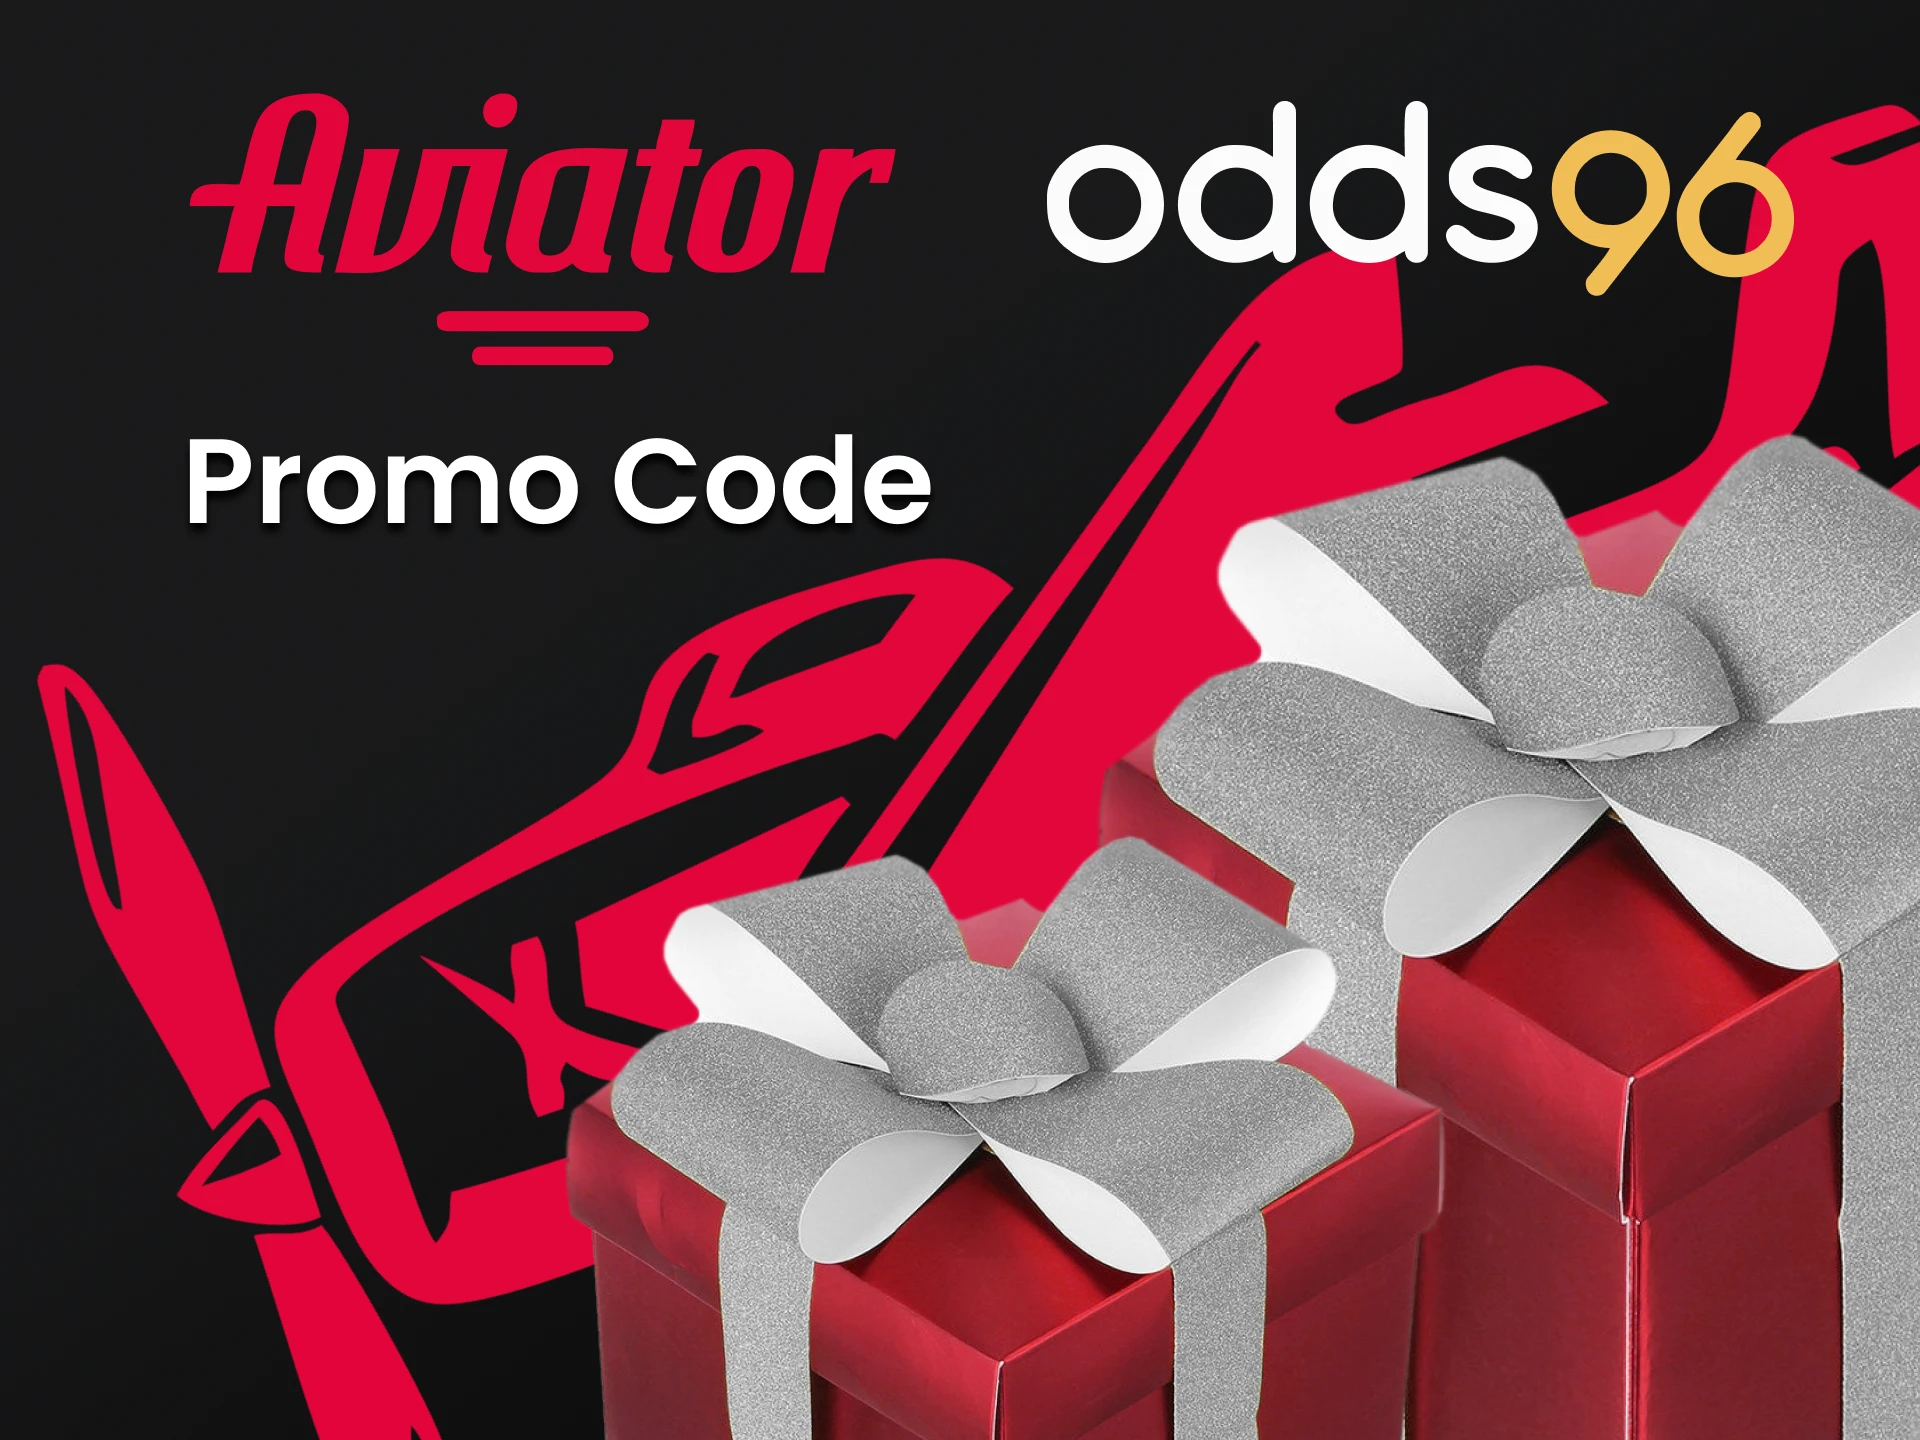 Get a bonus from Odds96 promo code for playing Aviator.